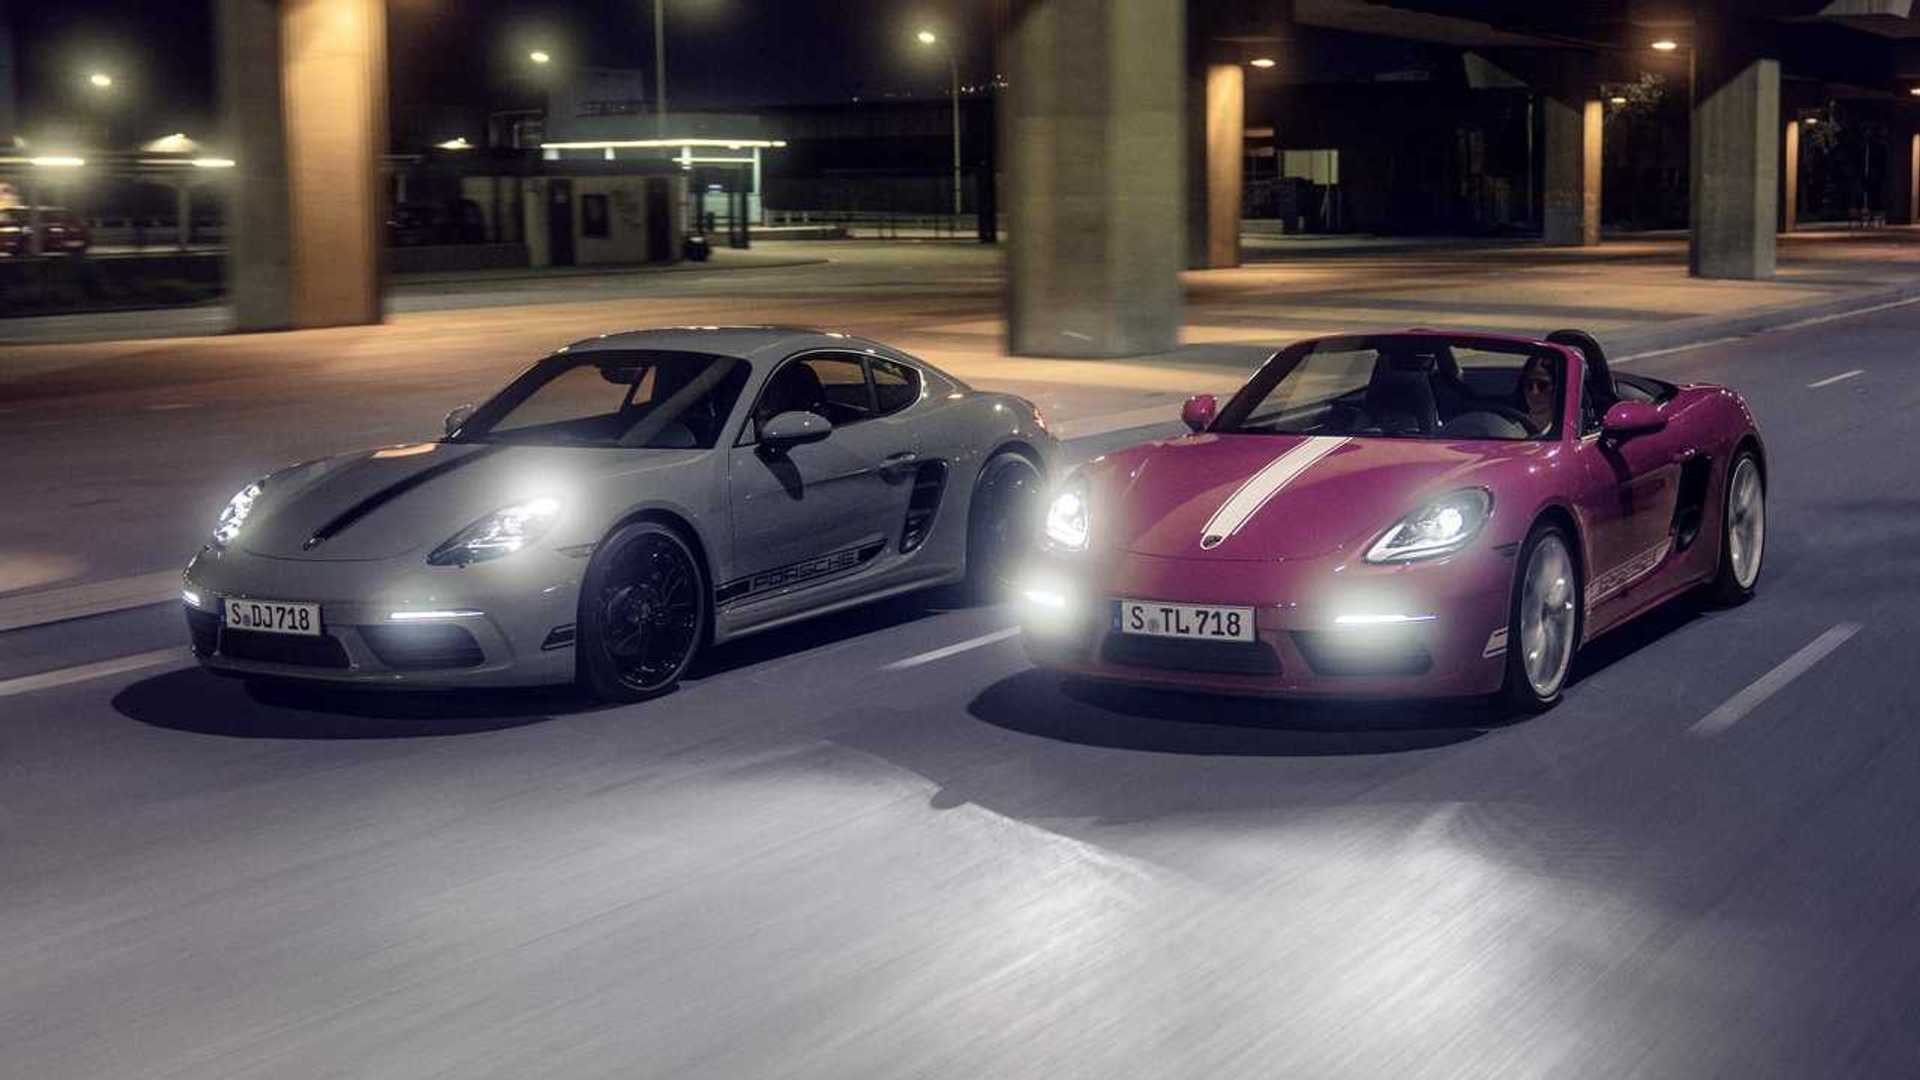 Porsche 718 Boxster and Cayman Production is Canceled in Europe